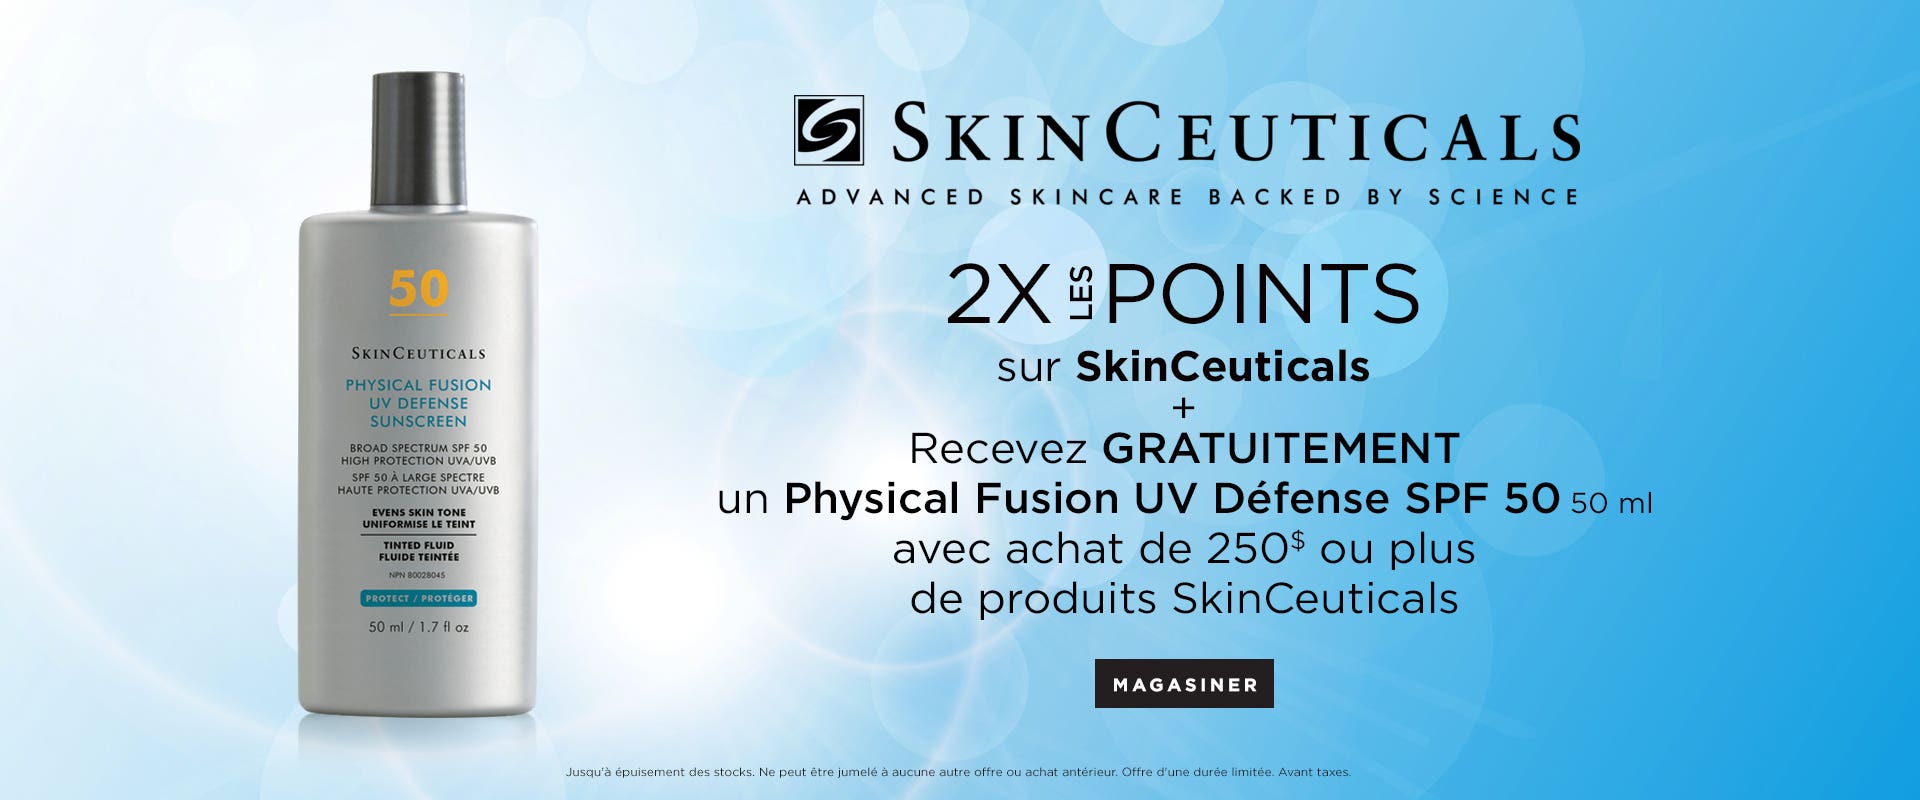 Receive a FREE SkinCeuticals Physical Fusion UV Defense SPF 50 with the purchase of $250+ in SkinCeuticals products.